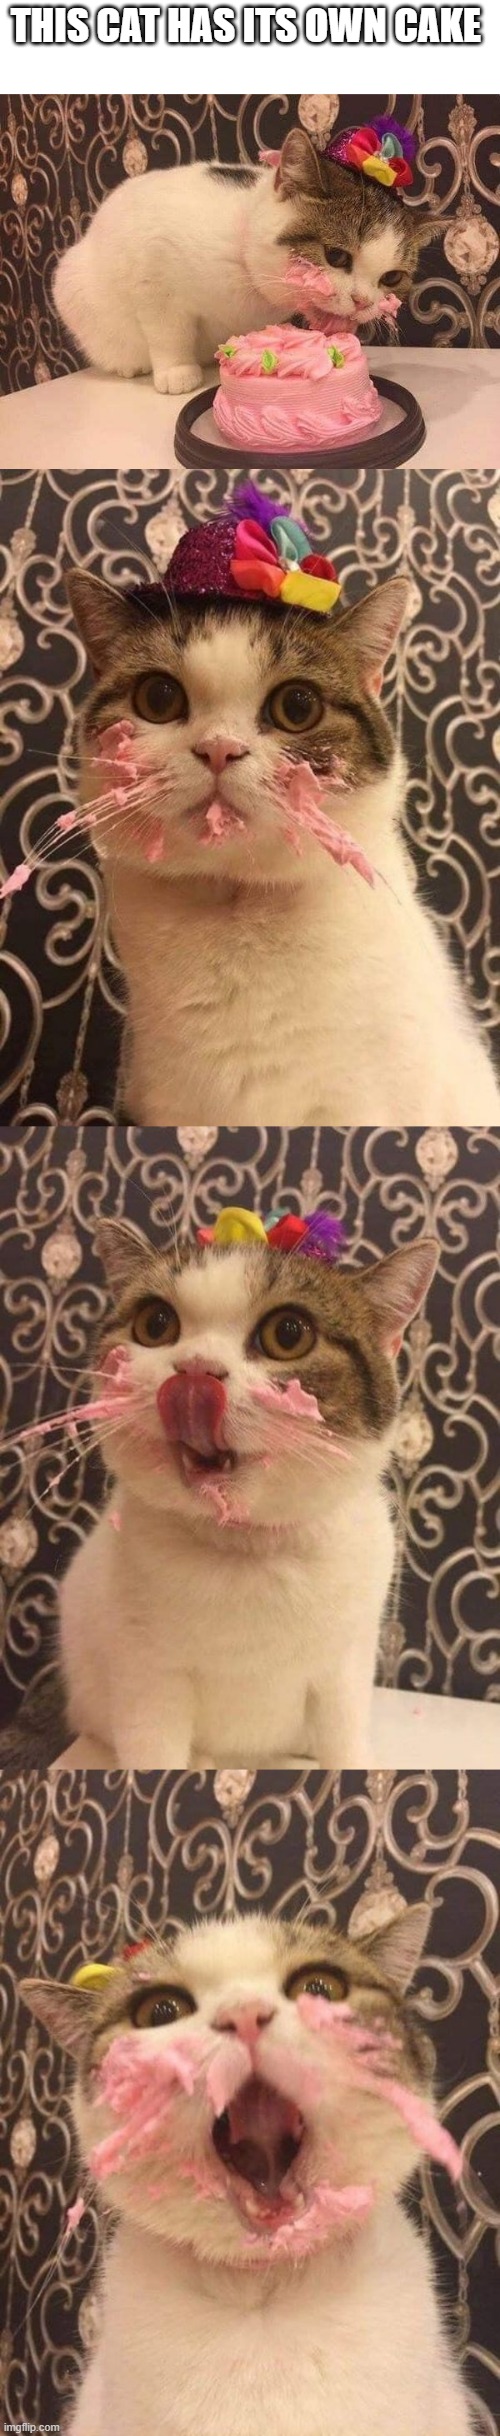 i want cake too "/ | THIS CAT HAS ITS OWN CAKE | image tagged in memes,funny,not funny,cats | made w/ Imgflip meme maker